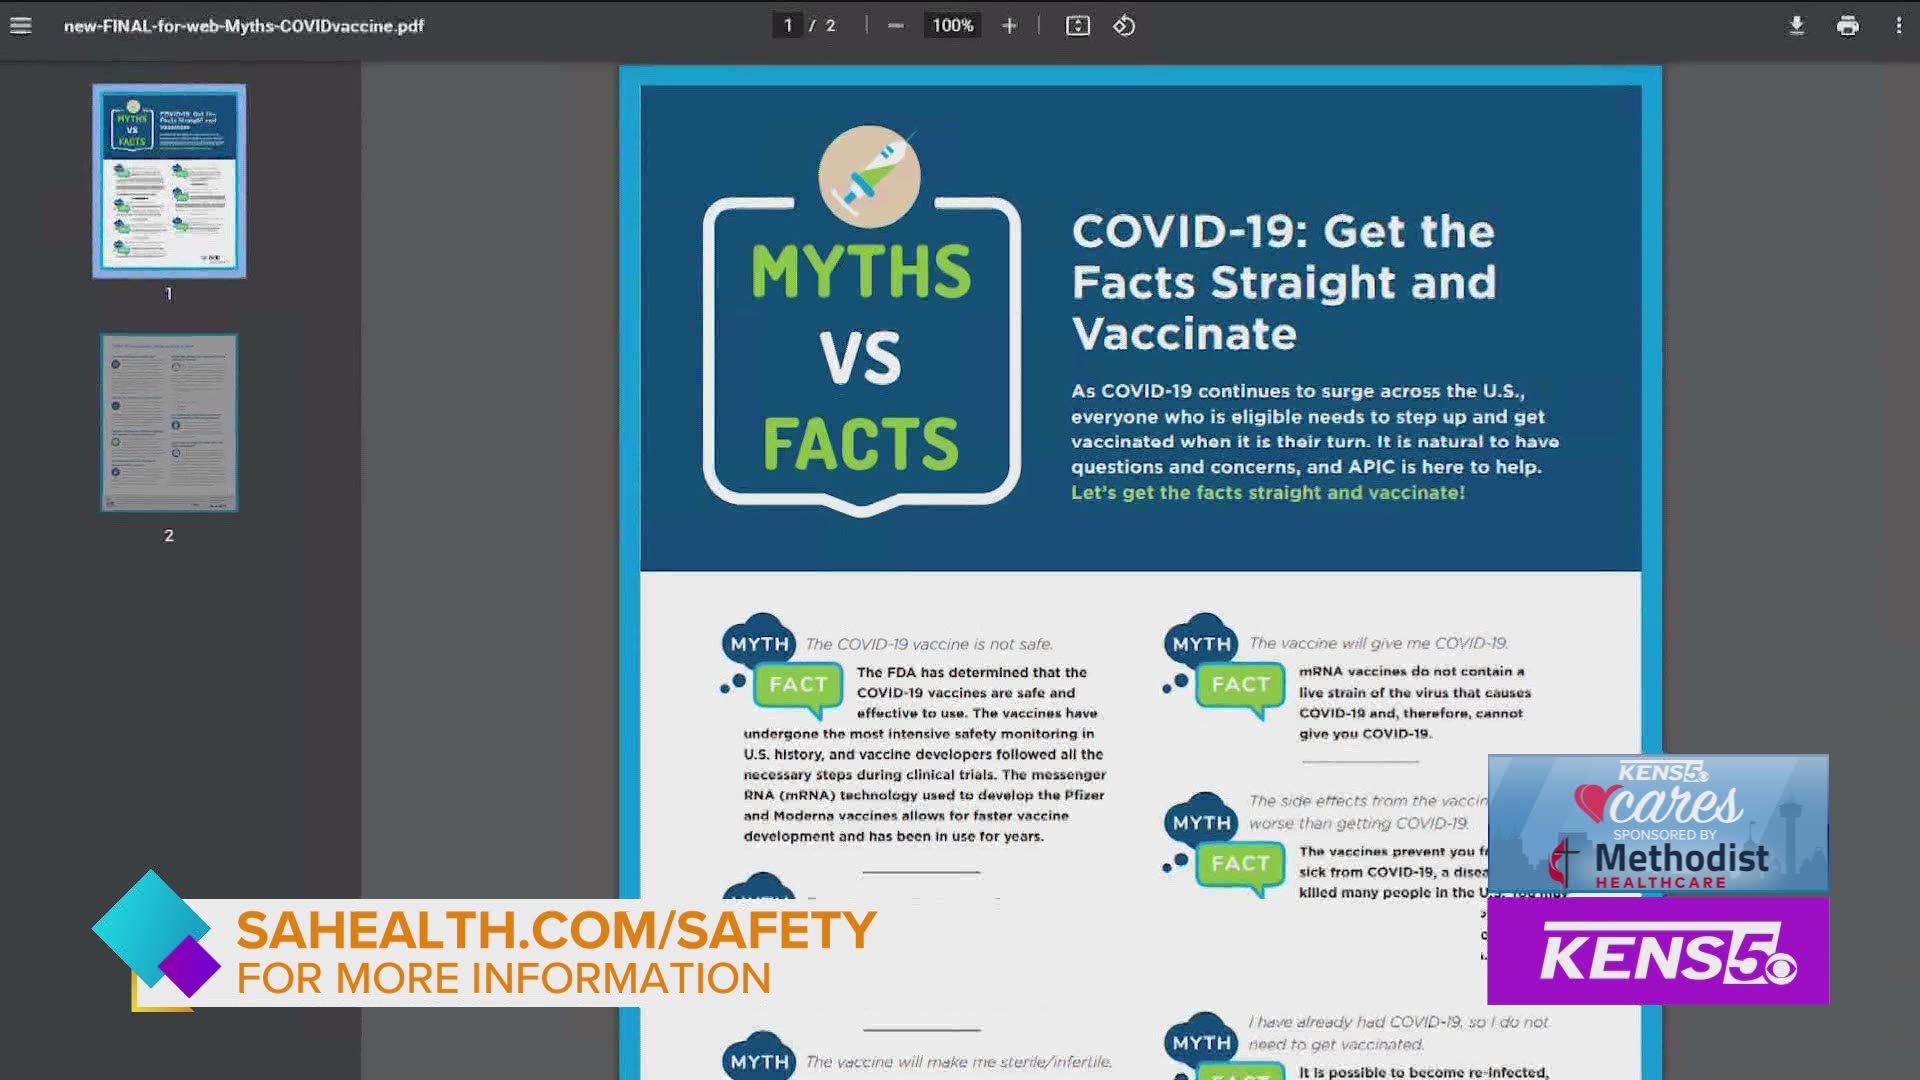 Methodist Healthcare and KENS 5 are teaming up to educate San Antonians about the facts and myths surrounding the Coronavirus vaccine.